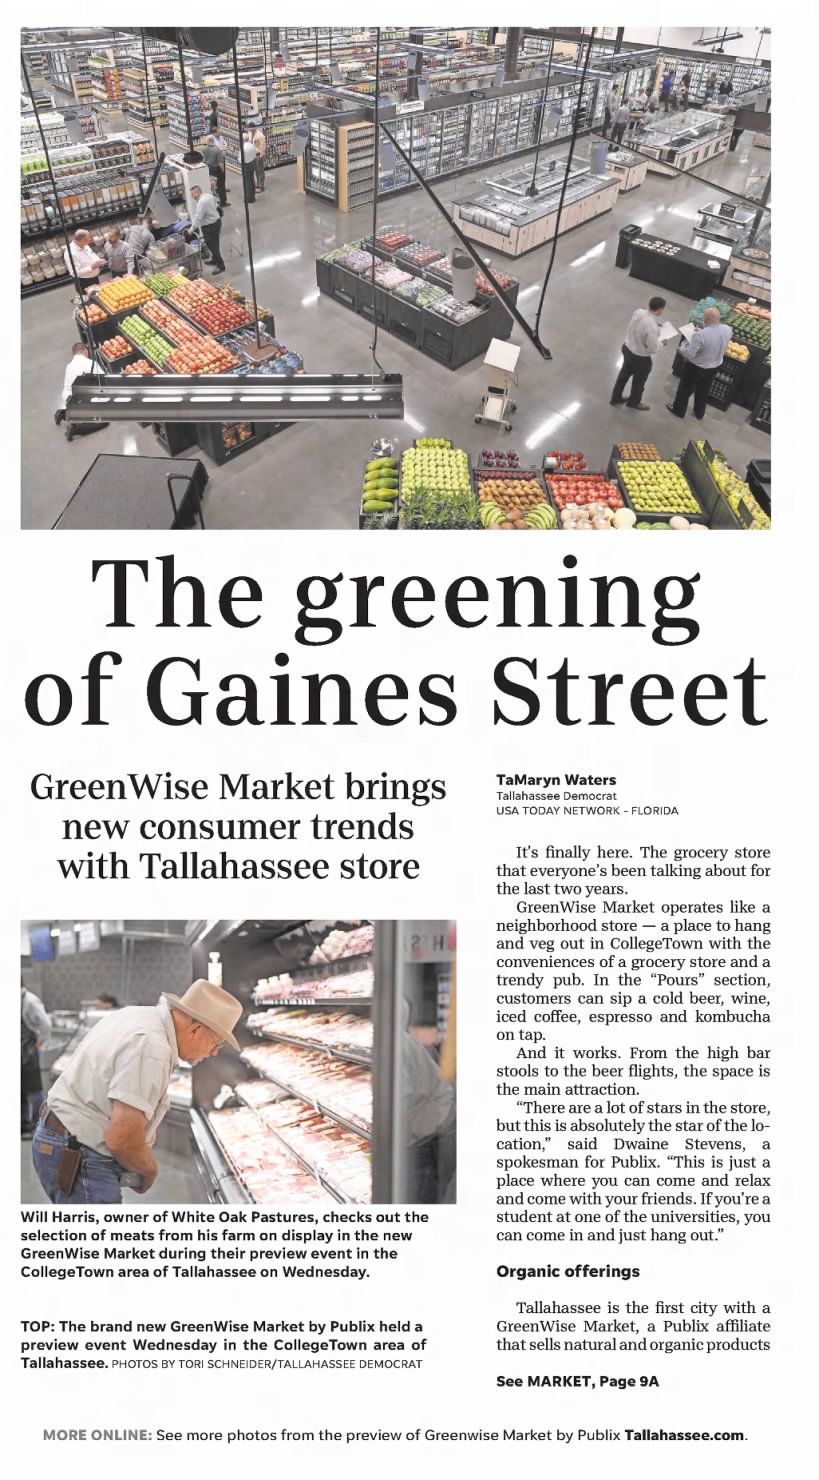 The greening of Gaines Street - GreenWise Market brings new consumer trends with Tallahassee store